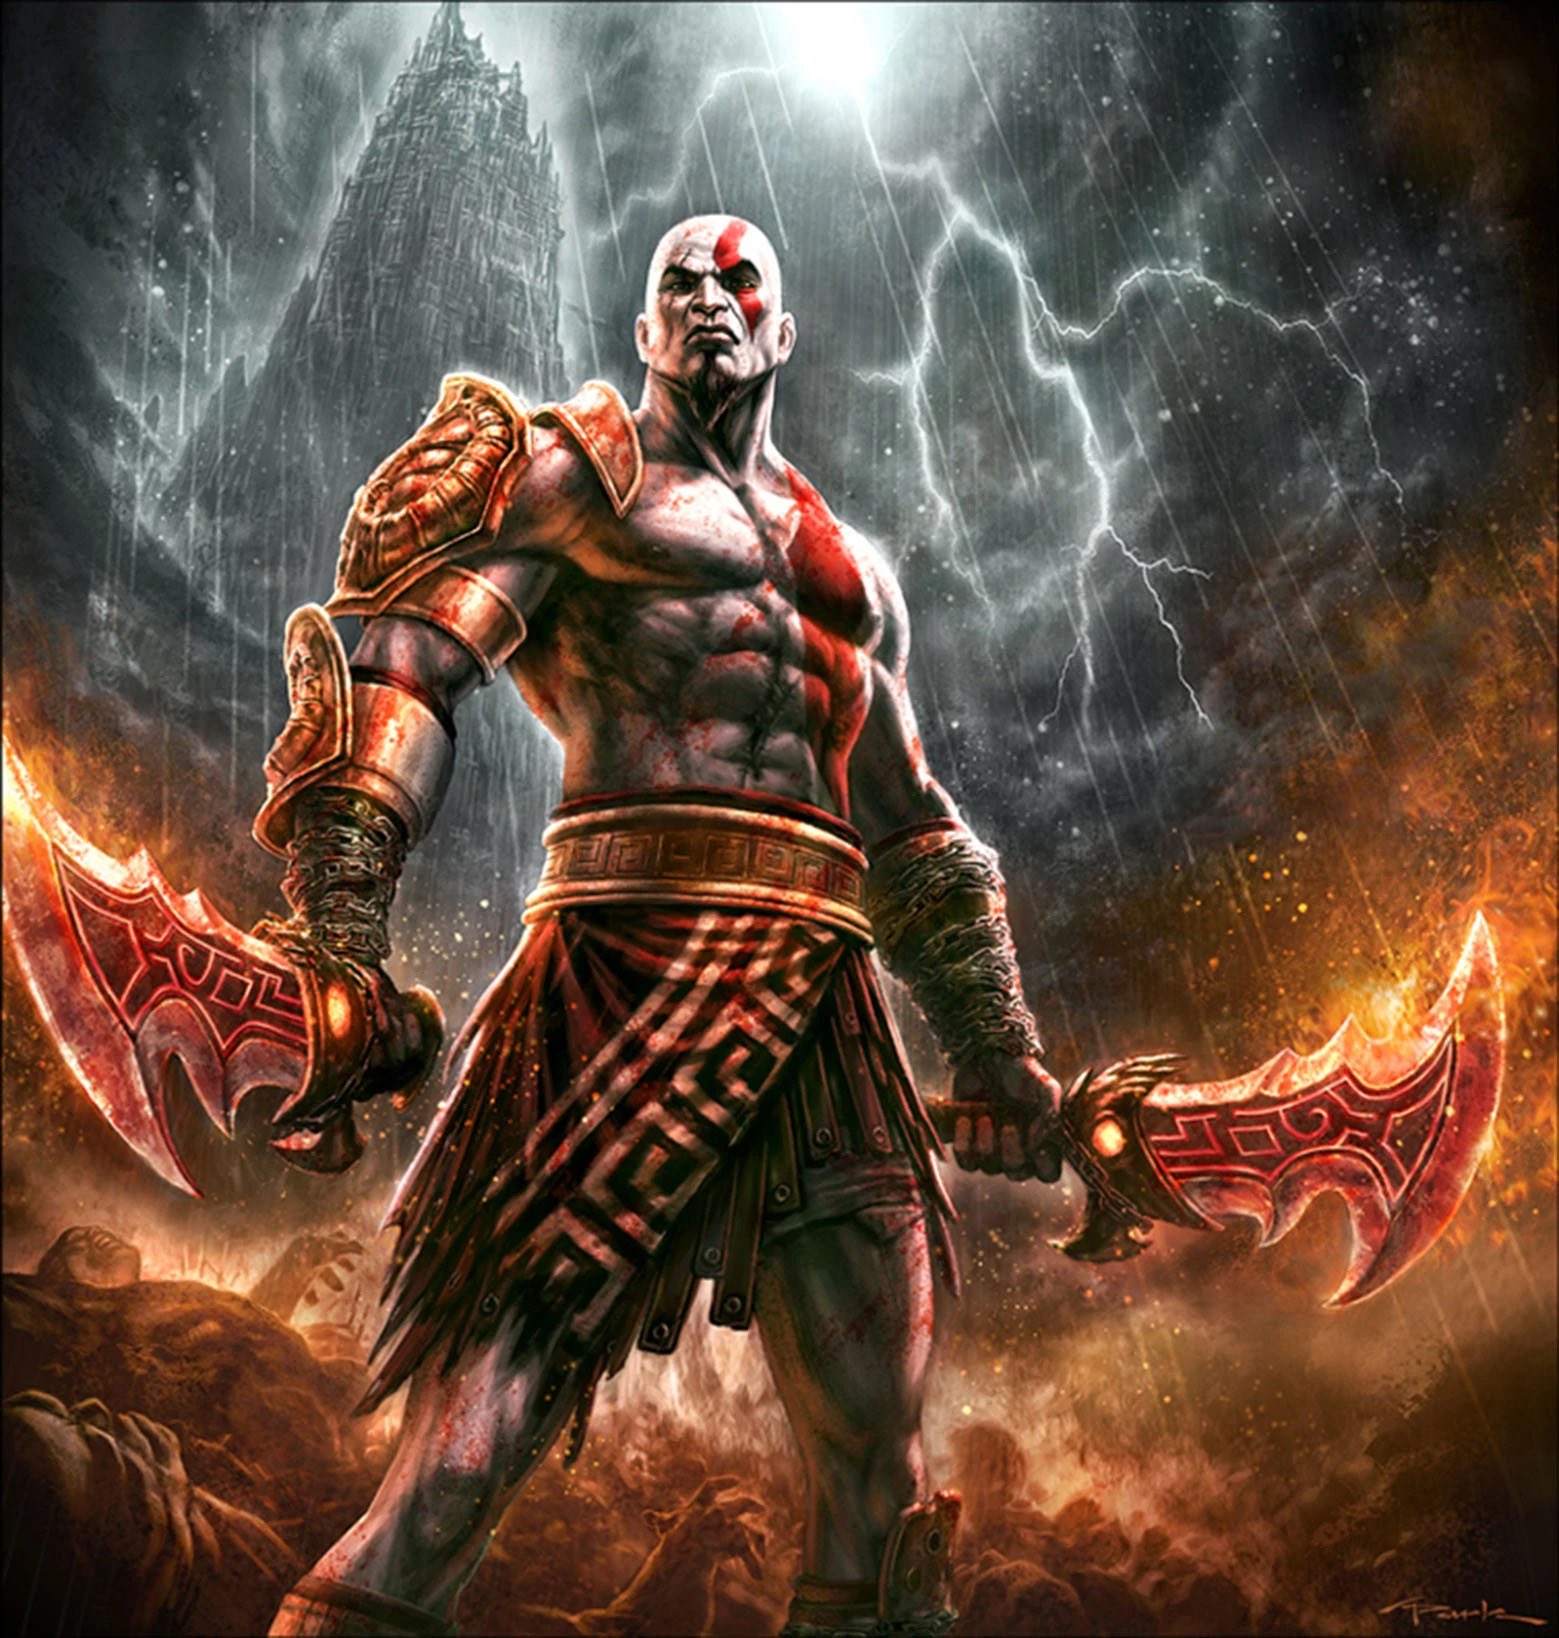 Kratos (God of War) VS SCP-076-2 Able (SCP Foundation). Who